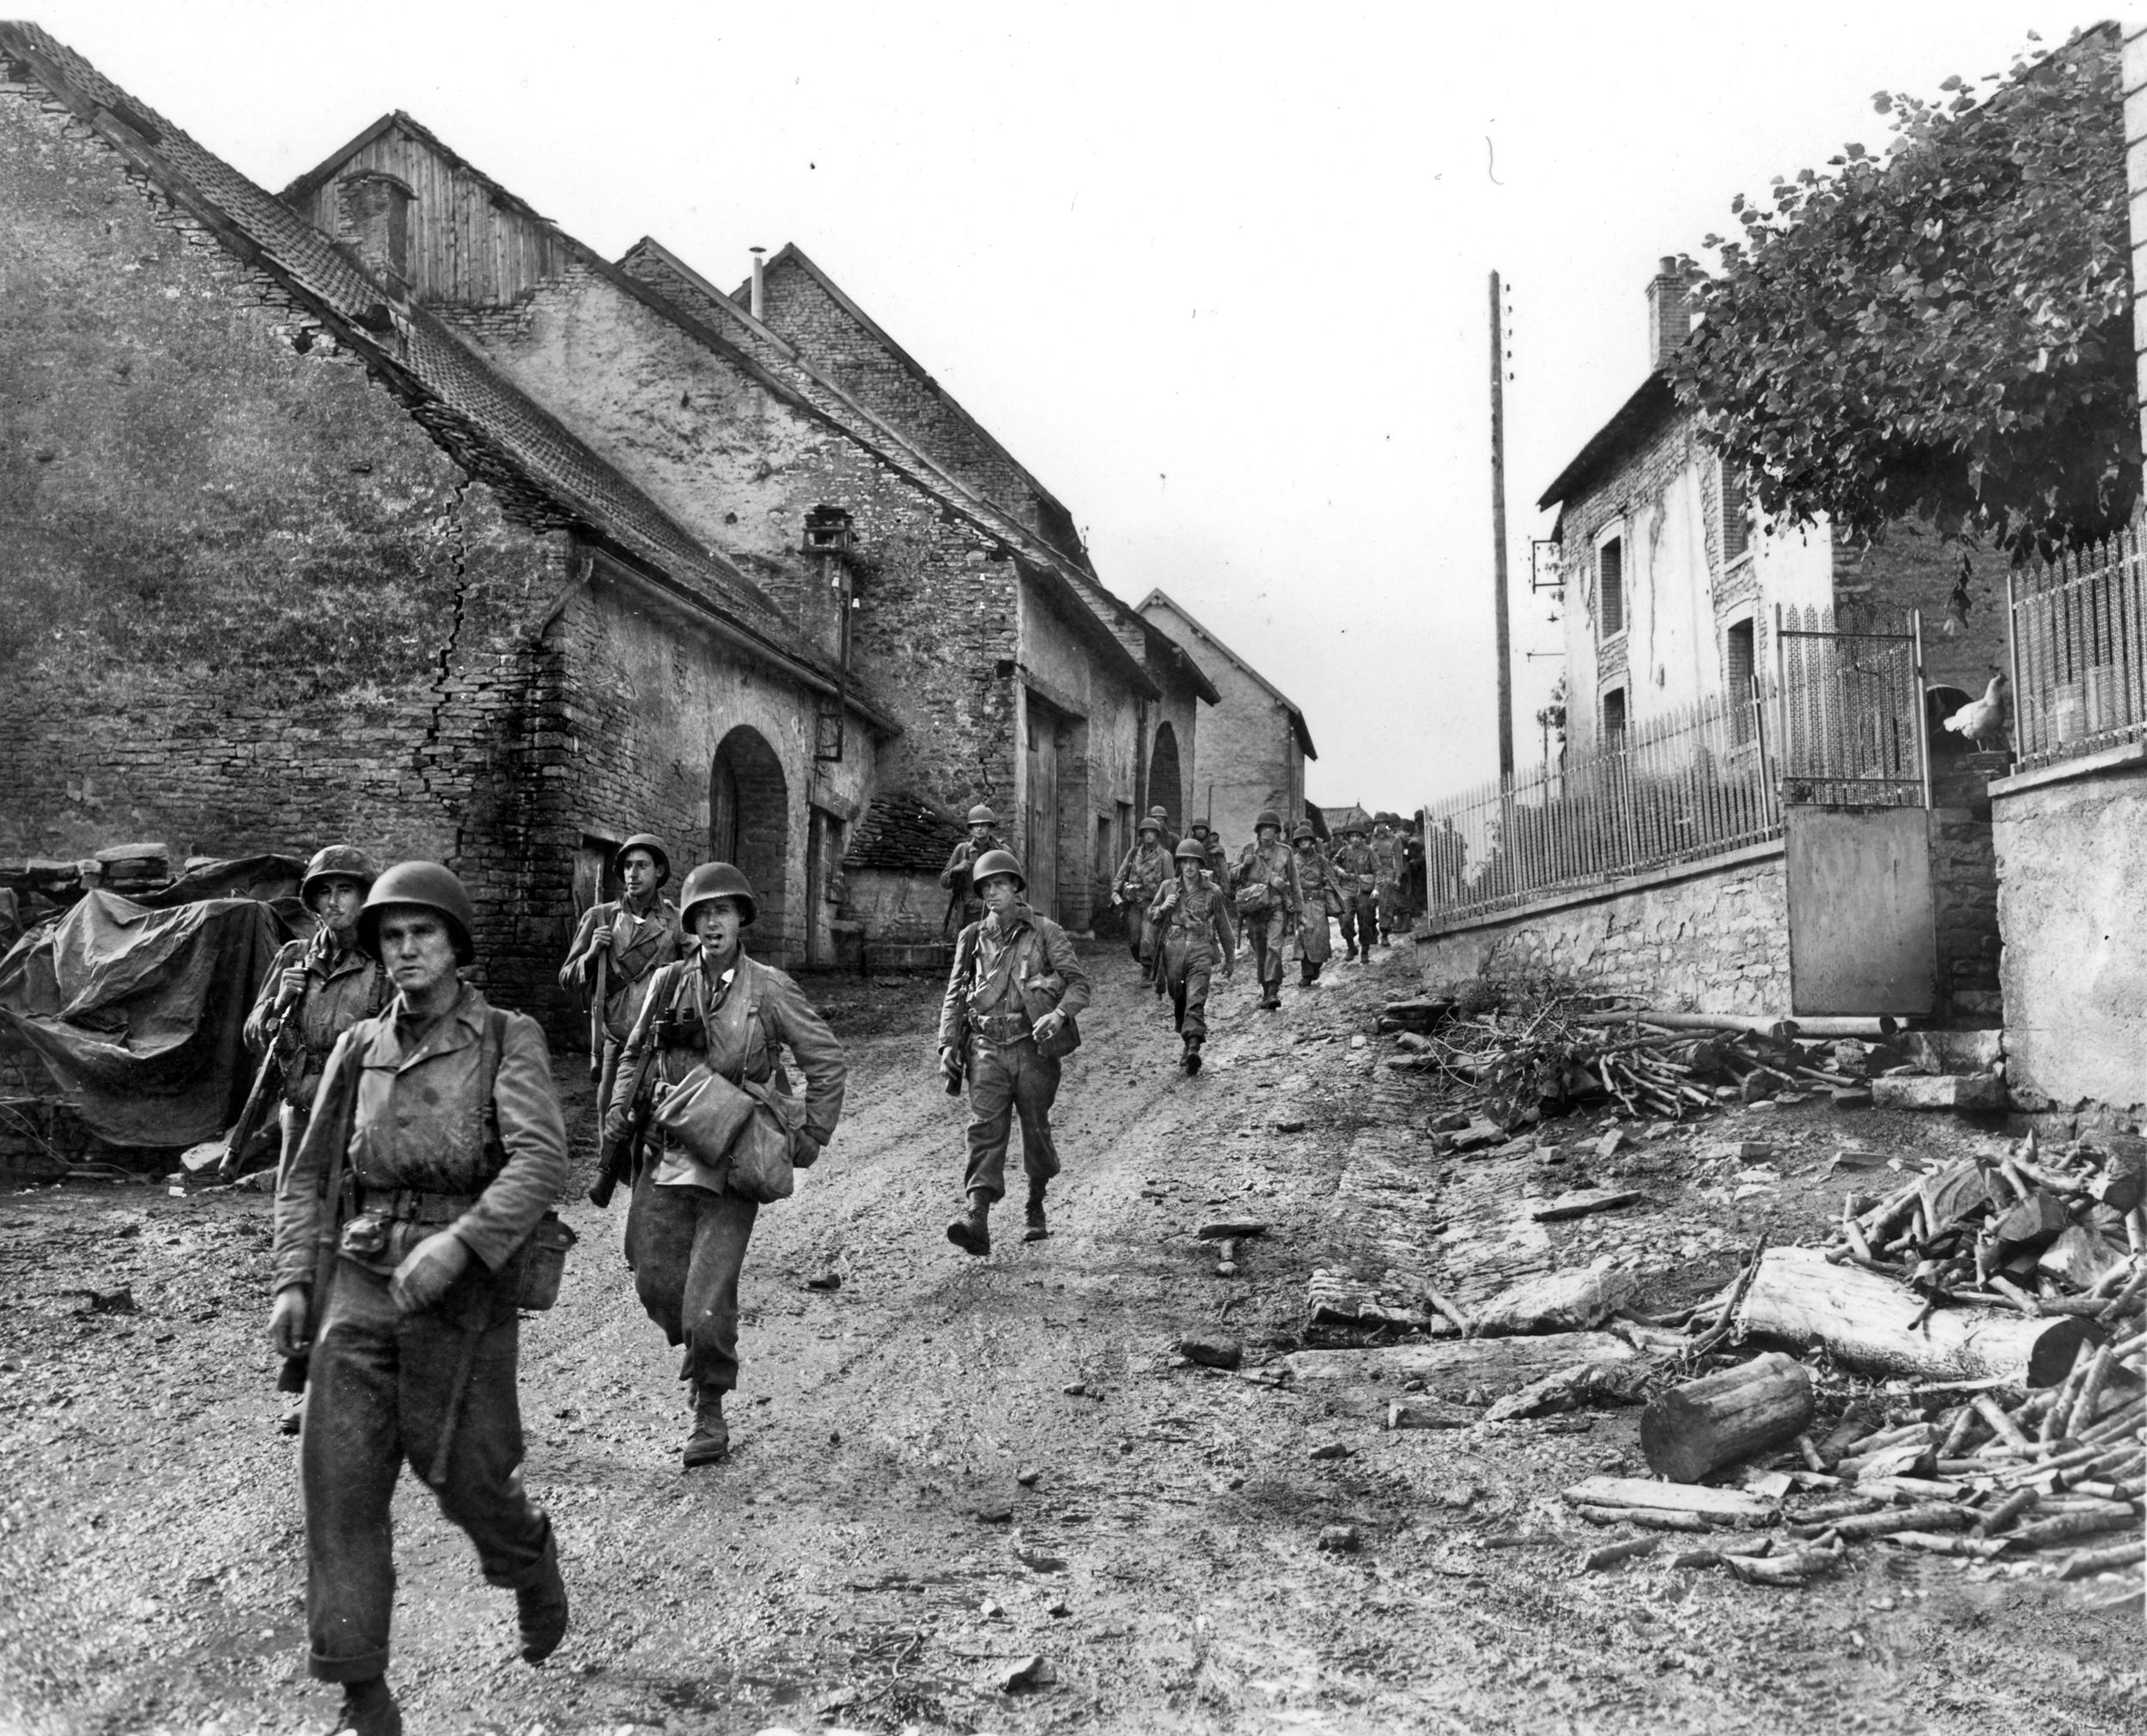 After landing at St. Tropez, members of the 3rd Division advanced swiftly northward, ultimately driving the enemy back across the German border and writing a new chapter about courage with each mile.